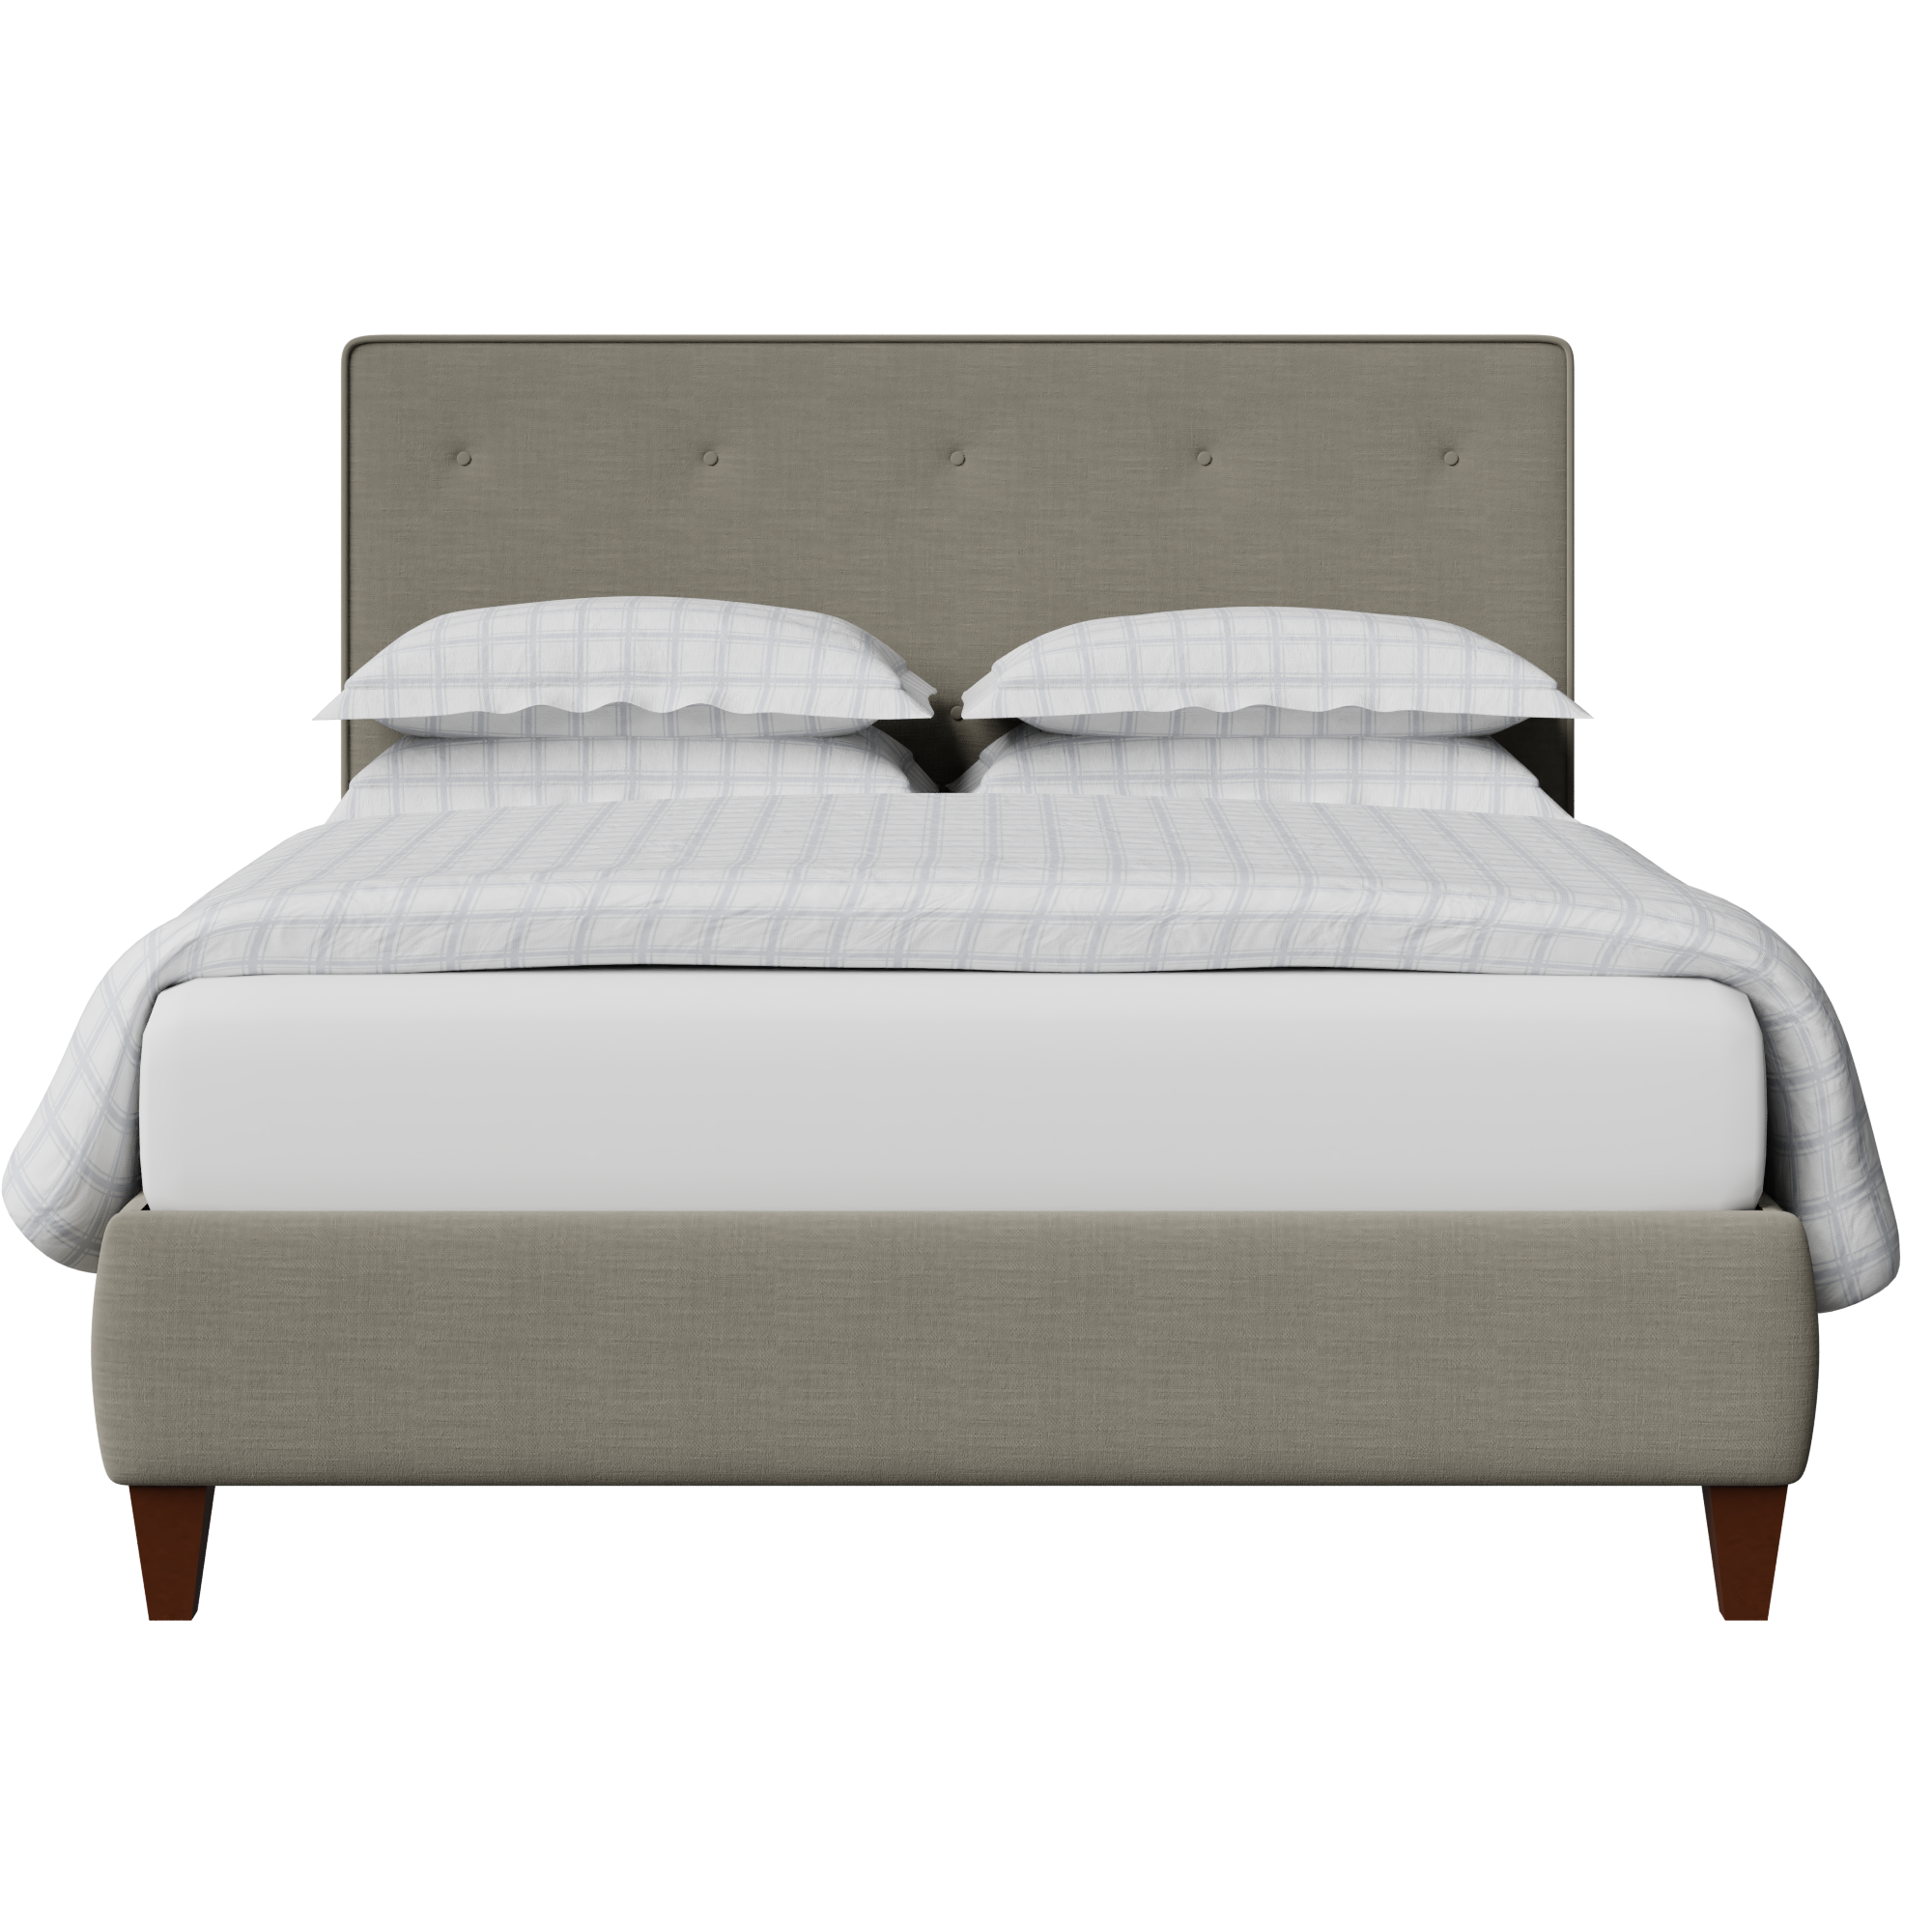 Yushan Buttoned upholstered bed in grey fabric